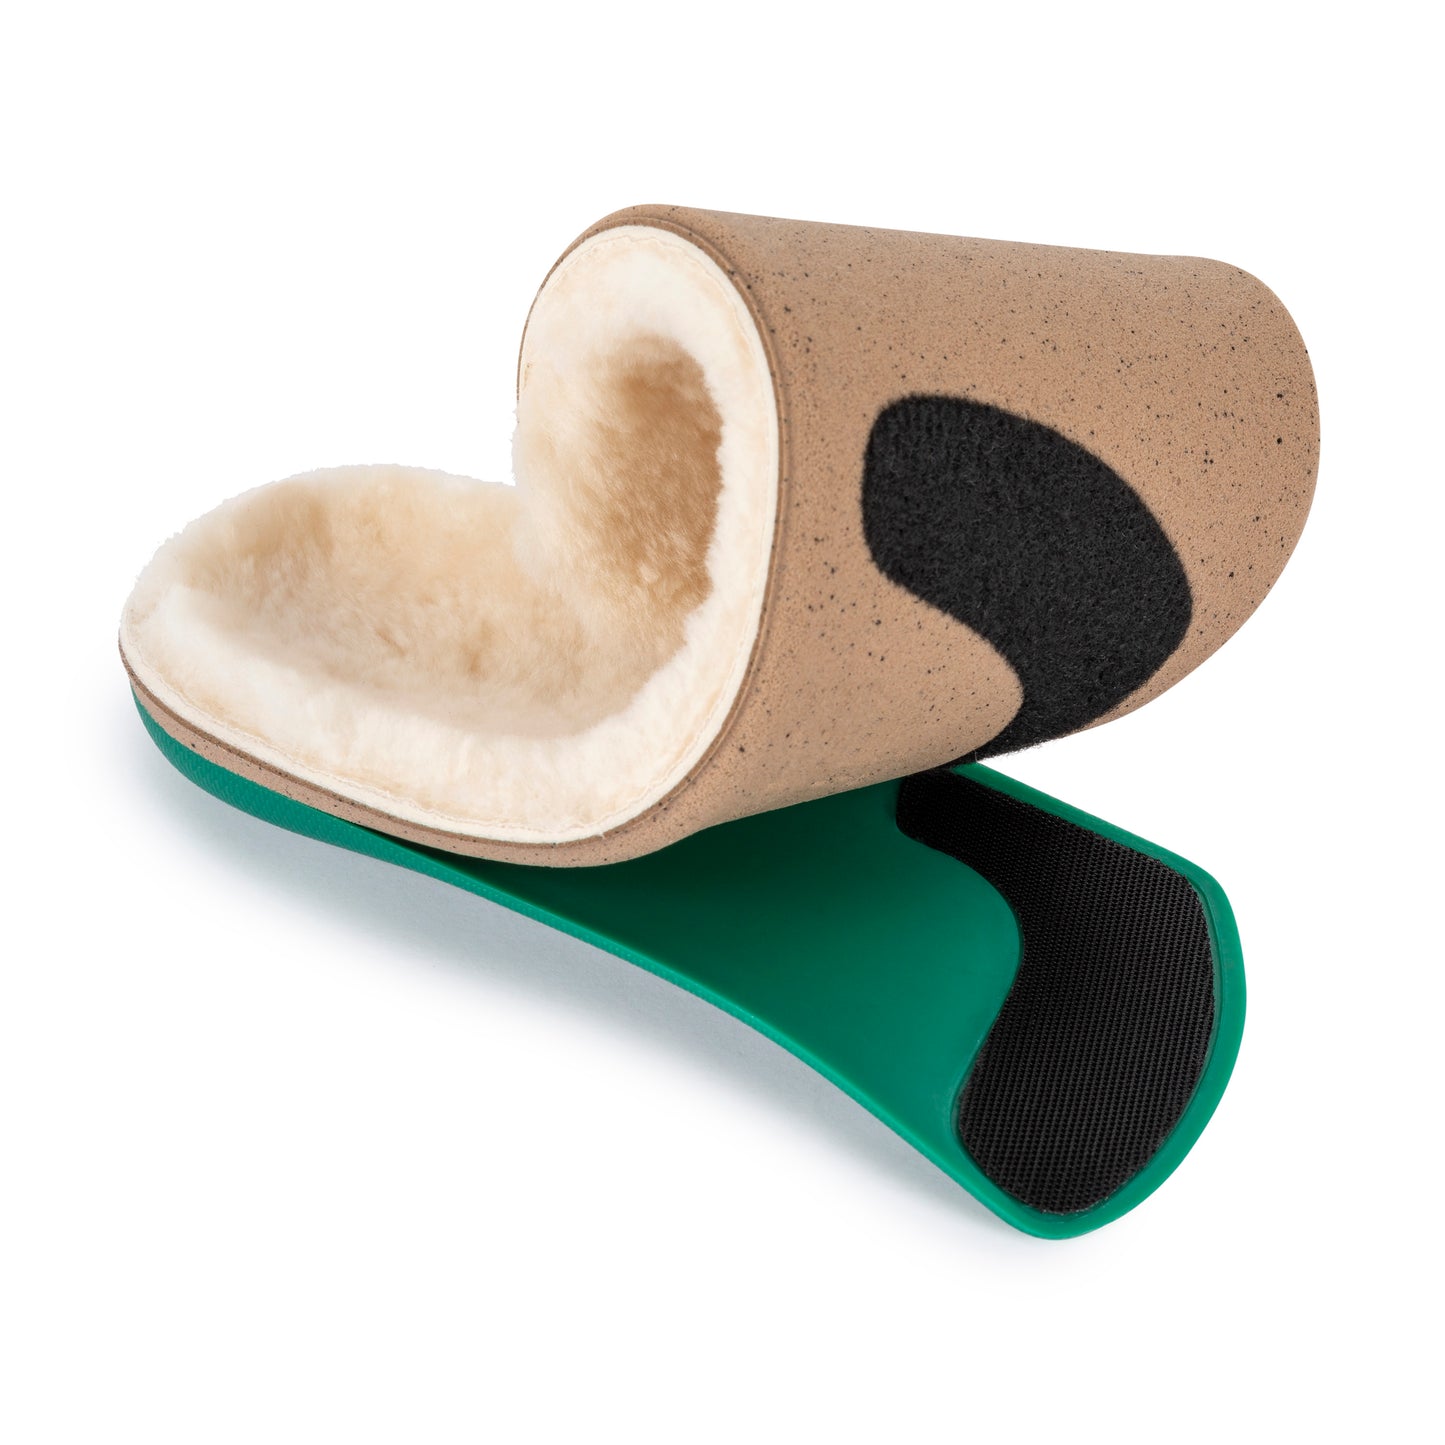 Natural shearling top covers on Ramble arch support insoles